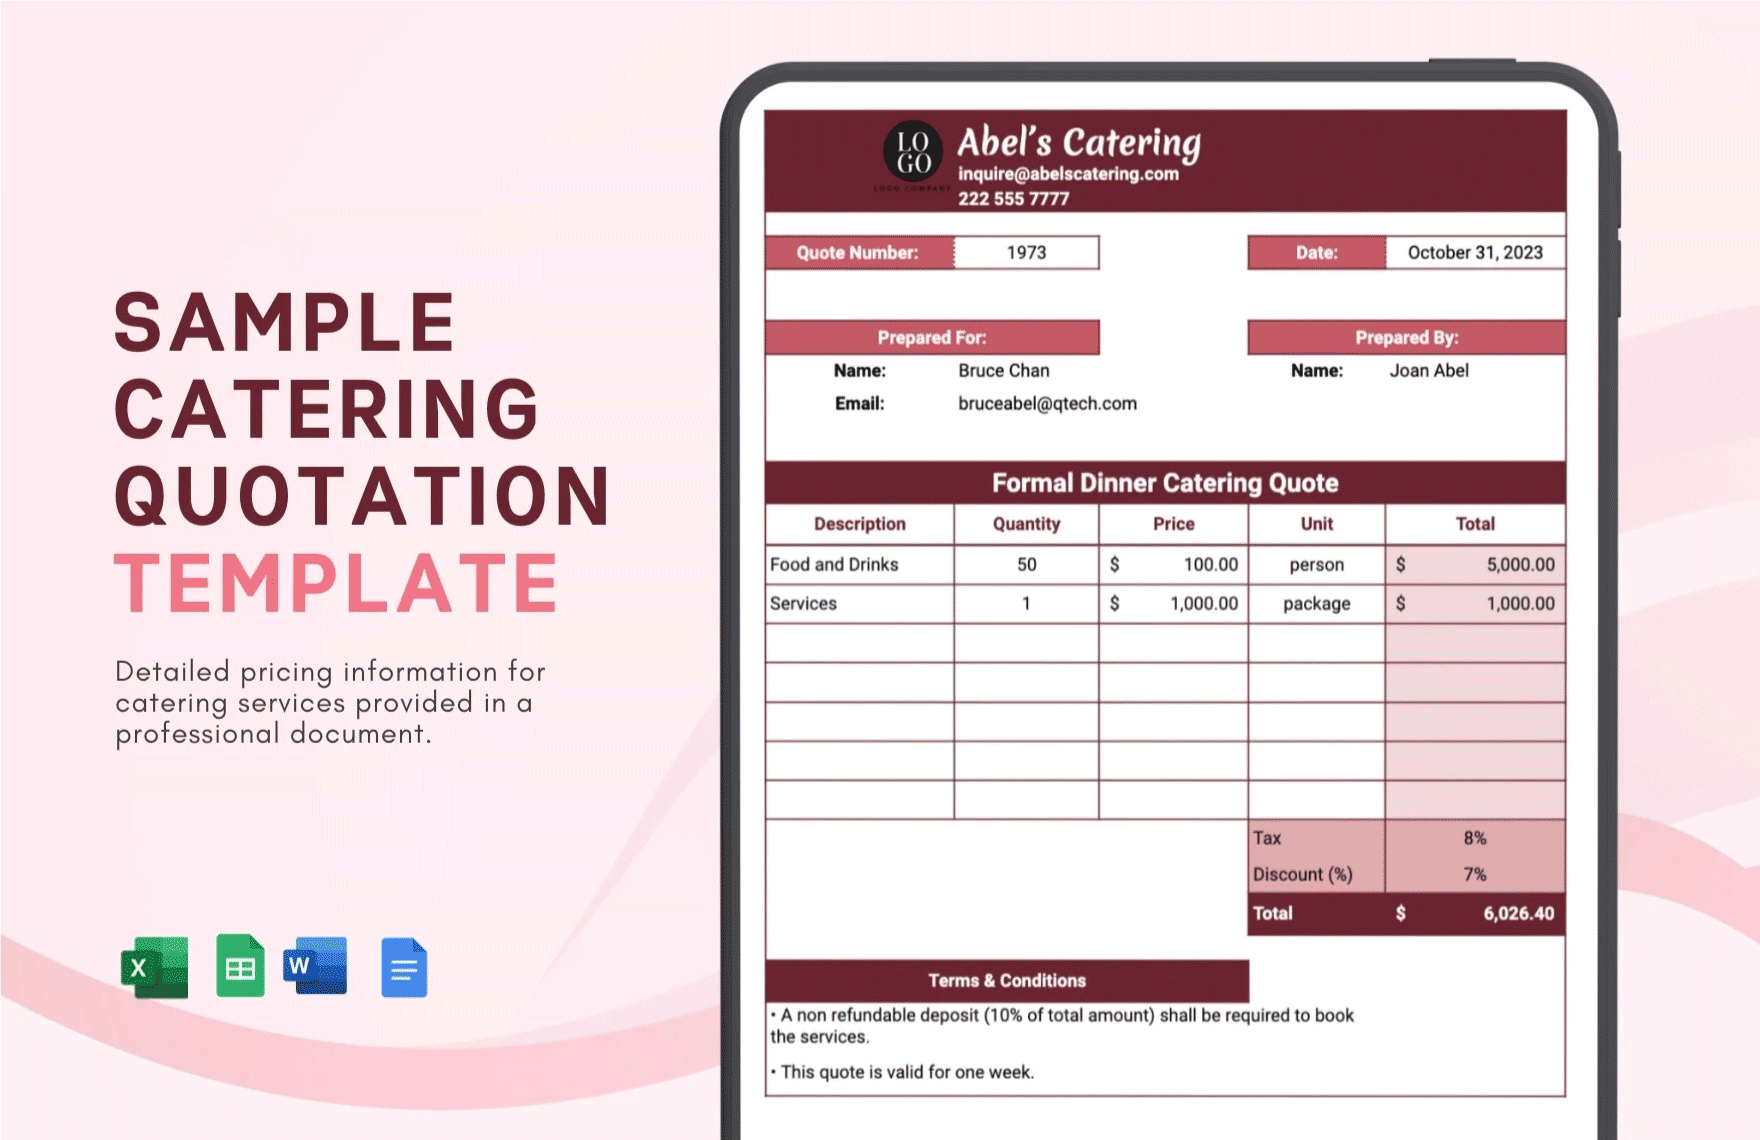 Free Sample Catering Quotation Template in Word, Google Docs, Excel, Google Sheets